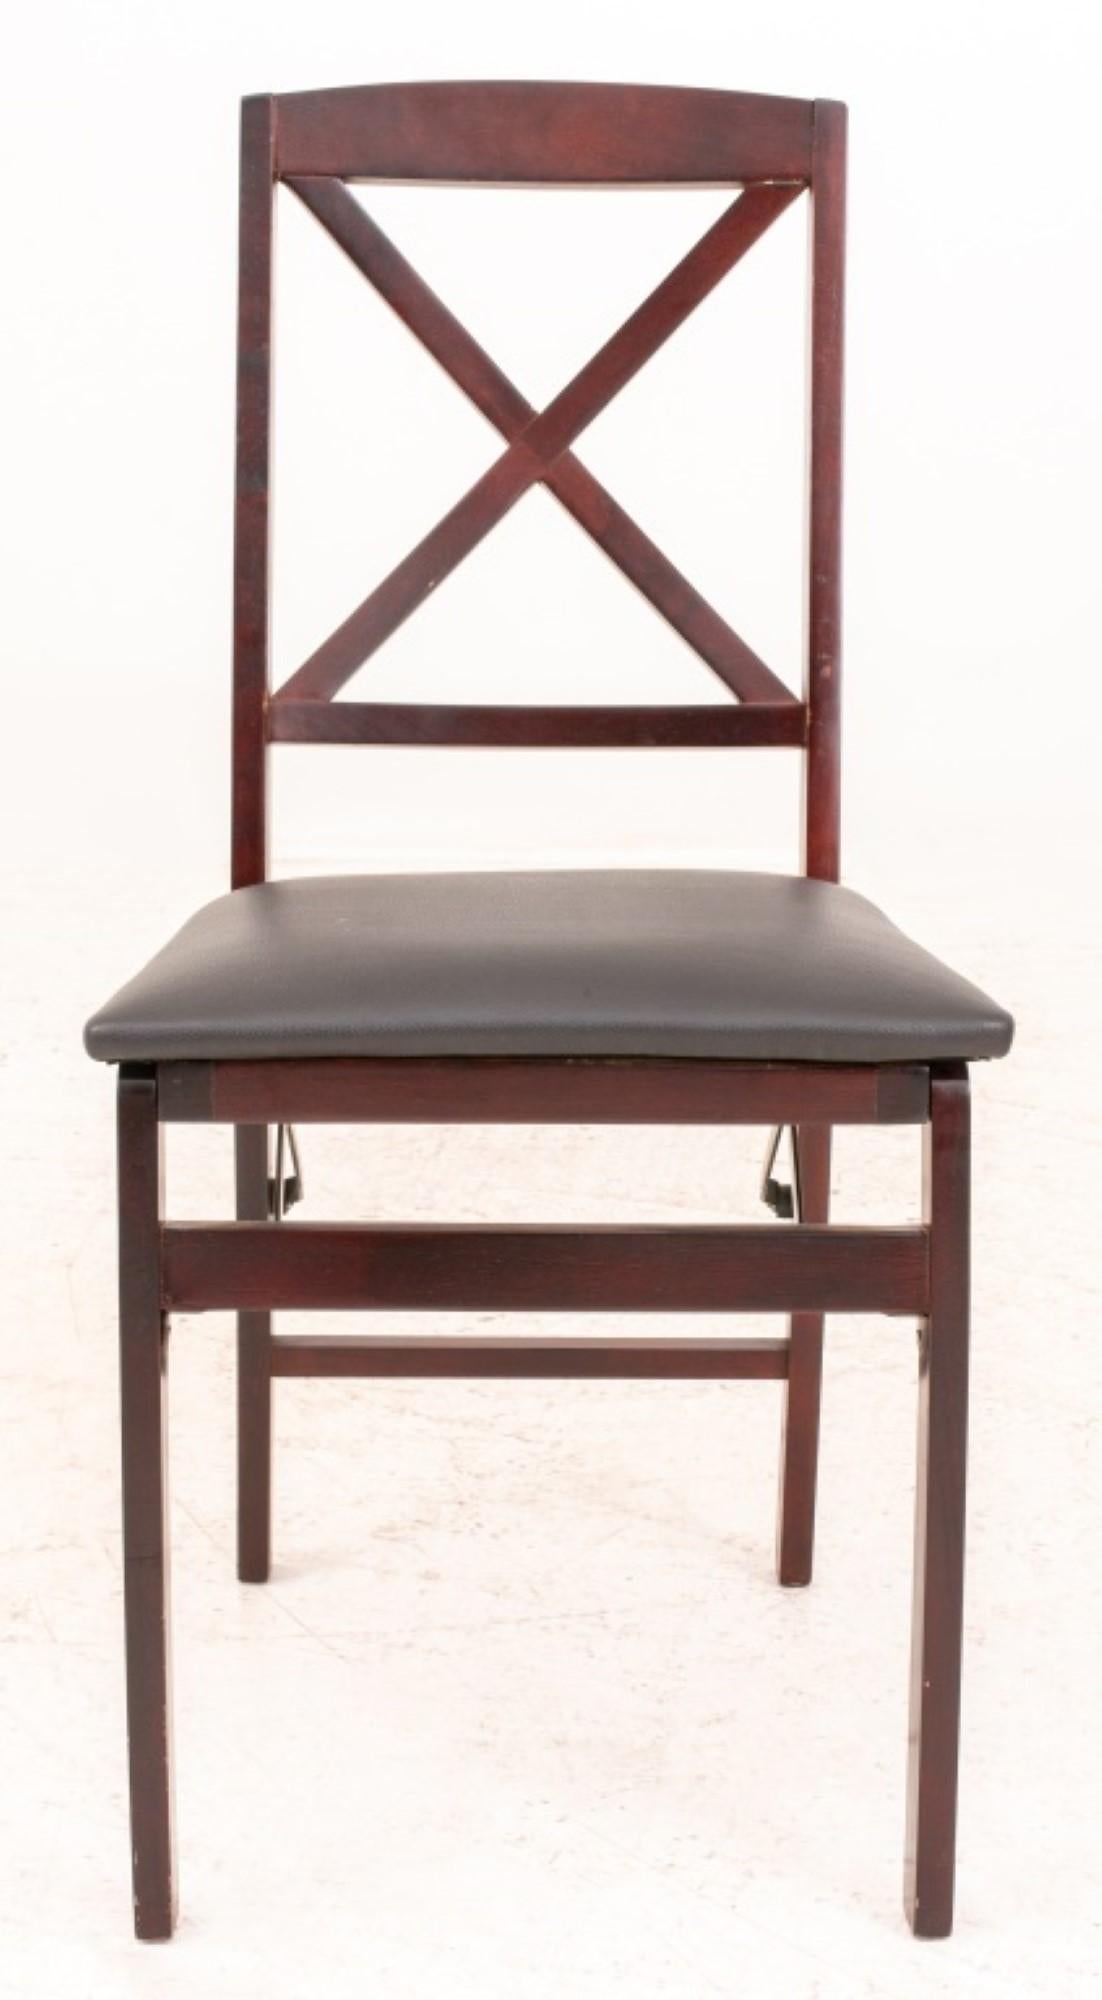 Contemporary Neoclassical Upholstered Mahogany Folding Chair 12 For Sale